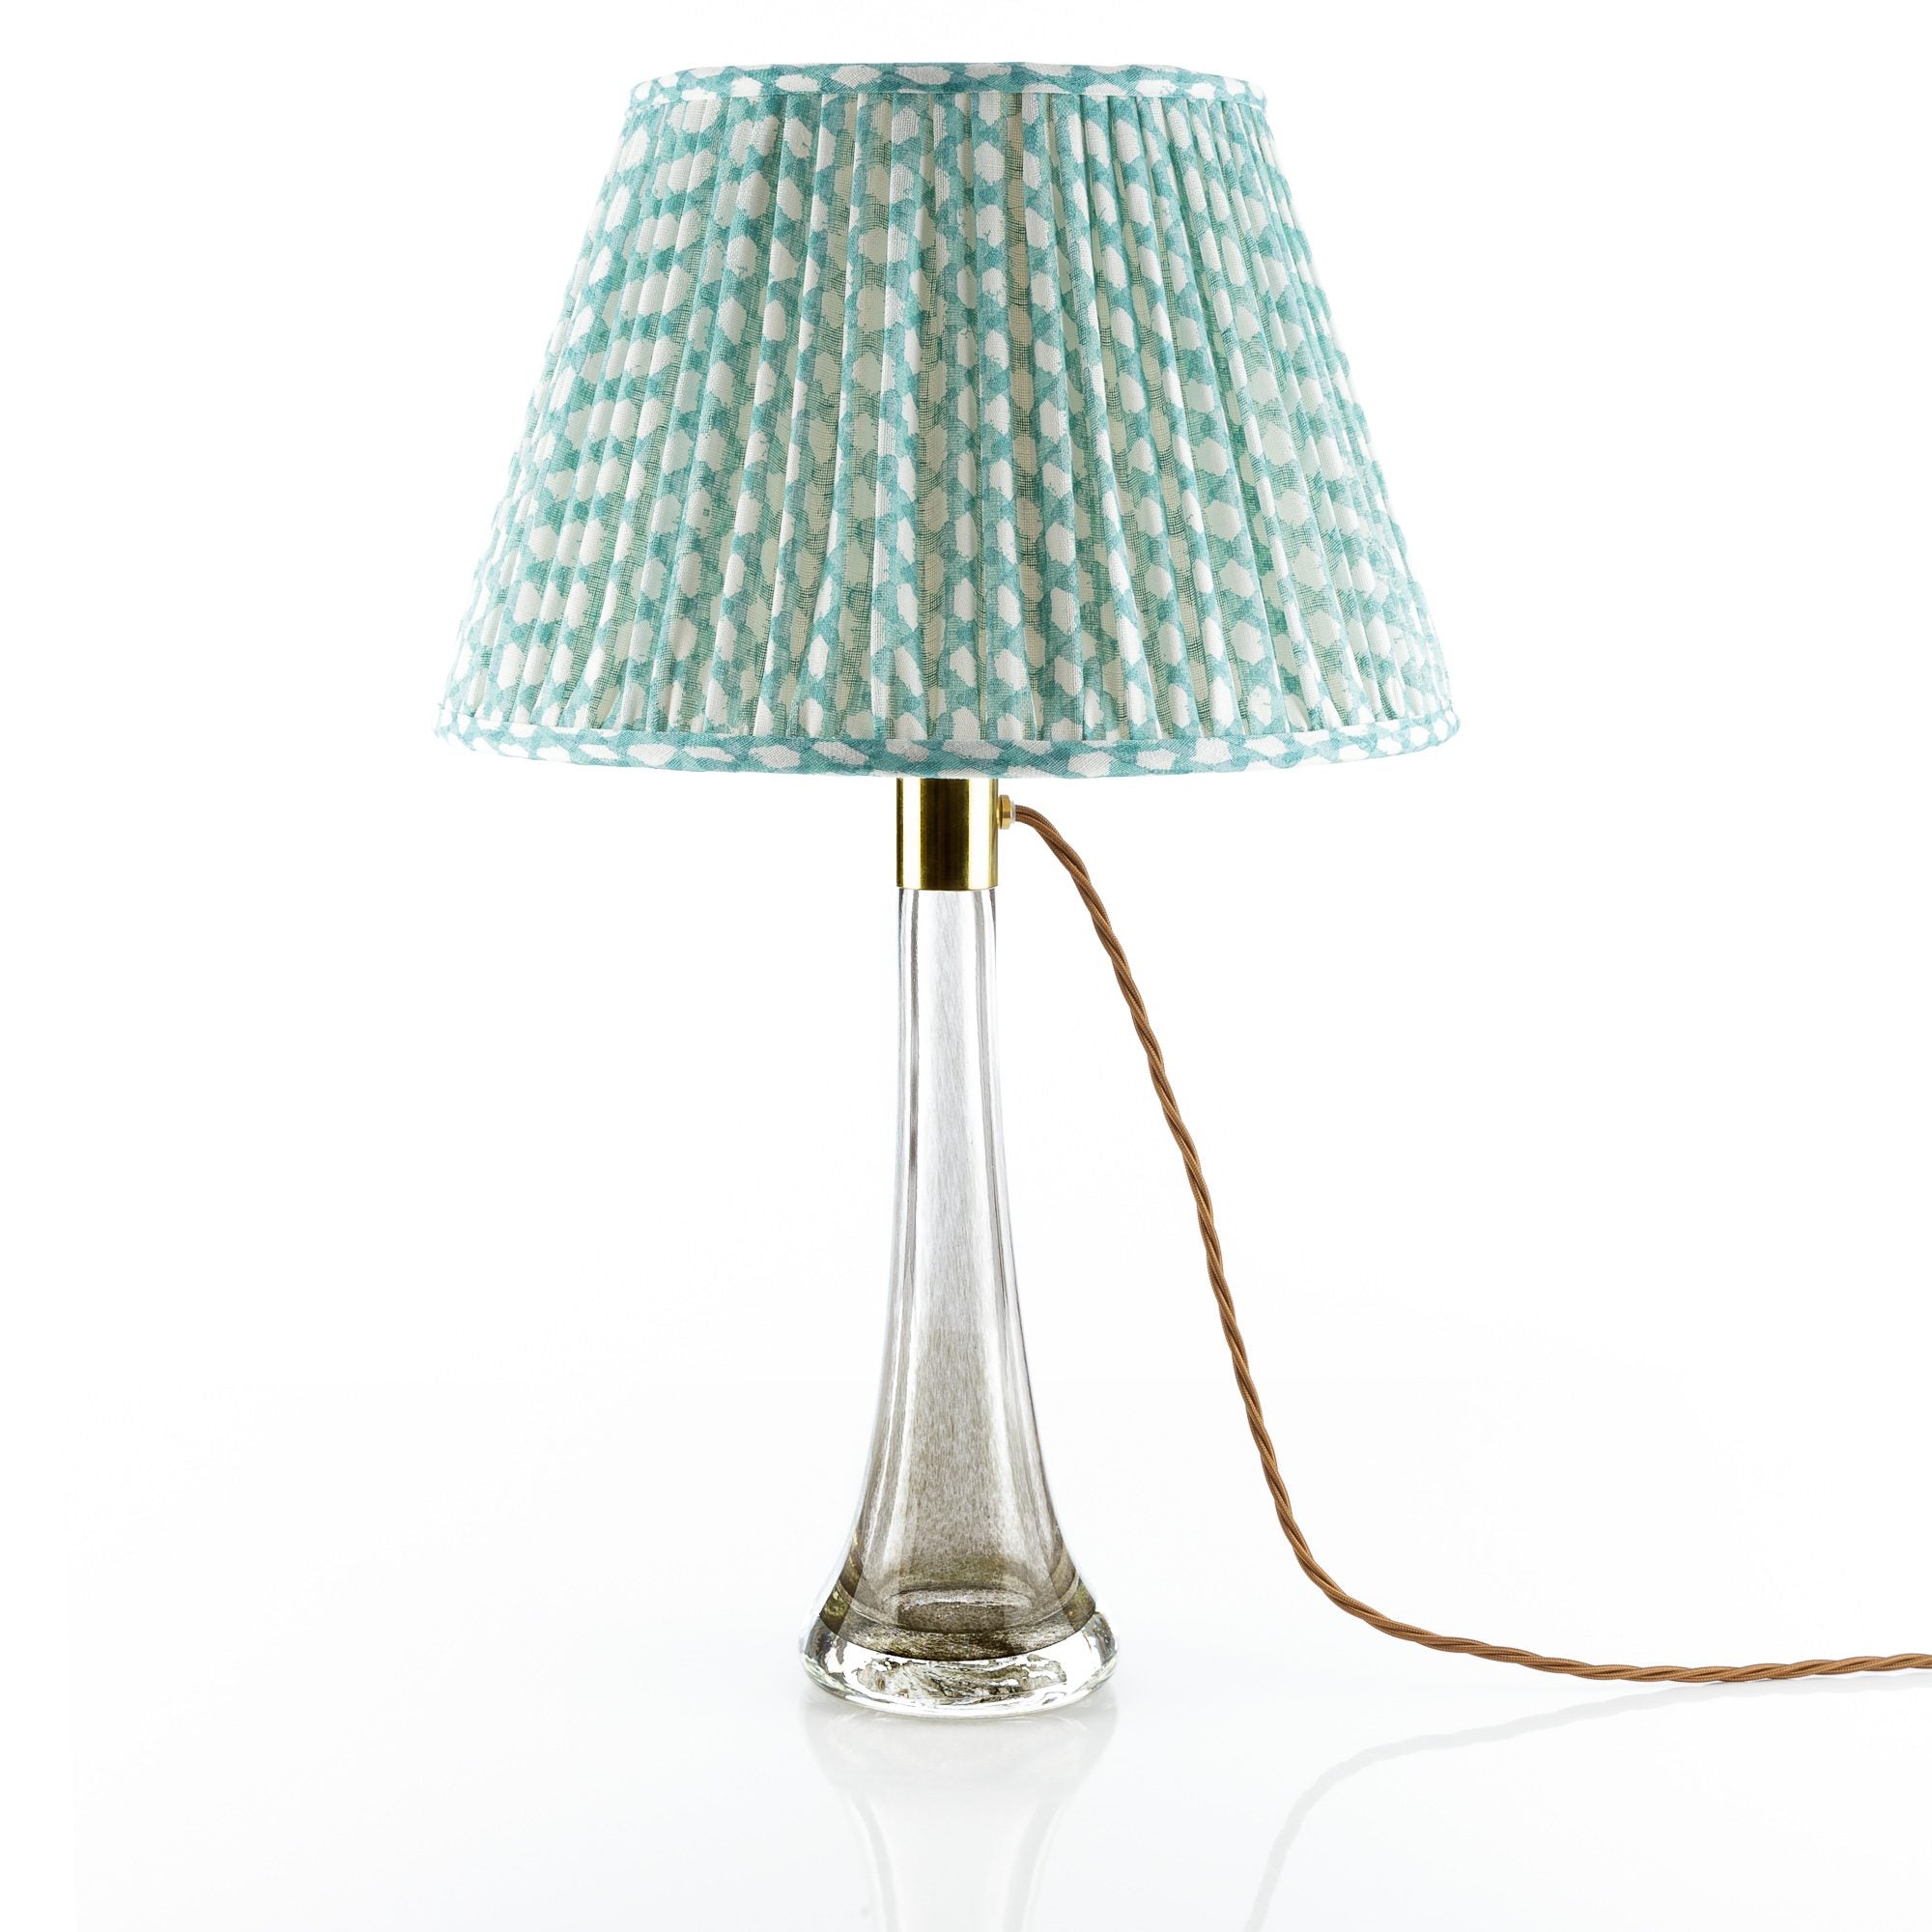 Wicker Turquoise Linen Lampshade